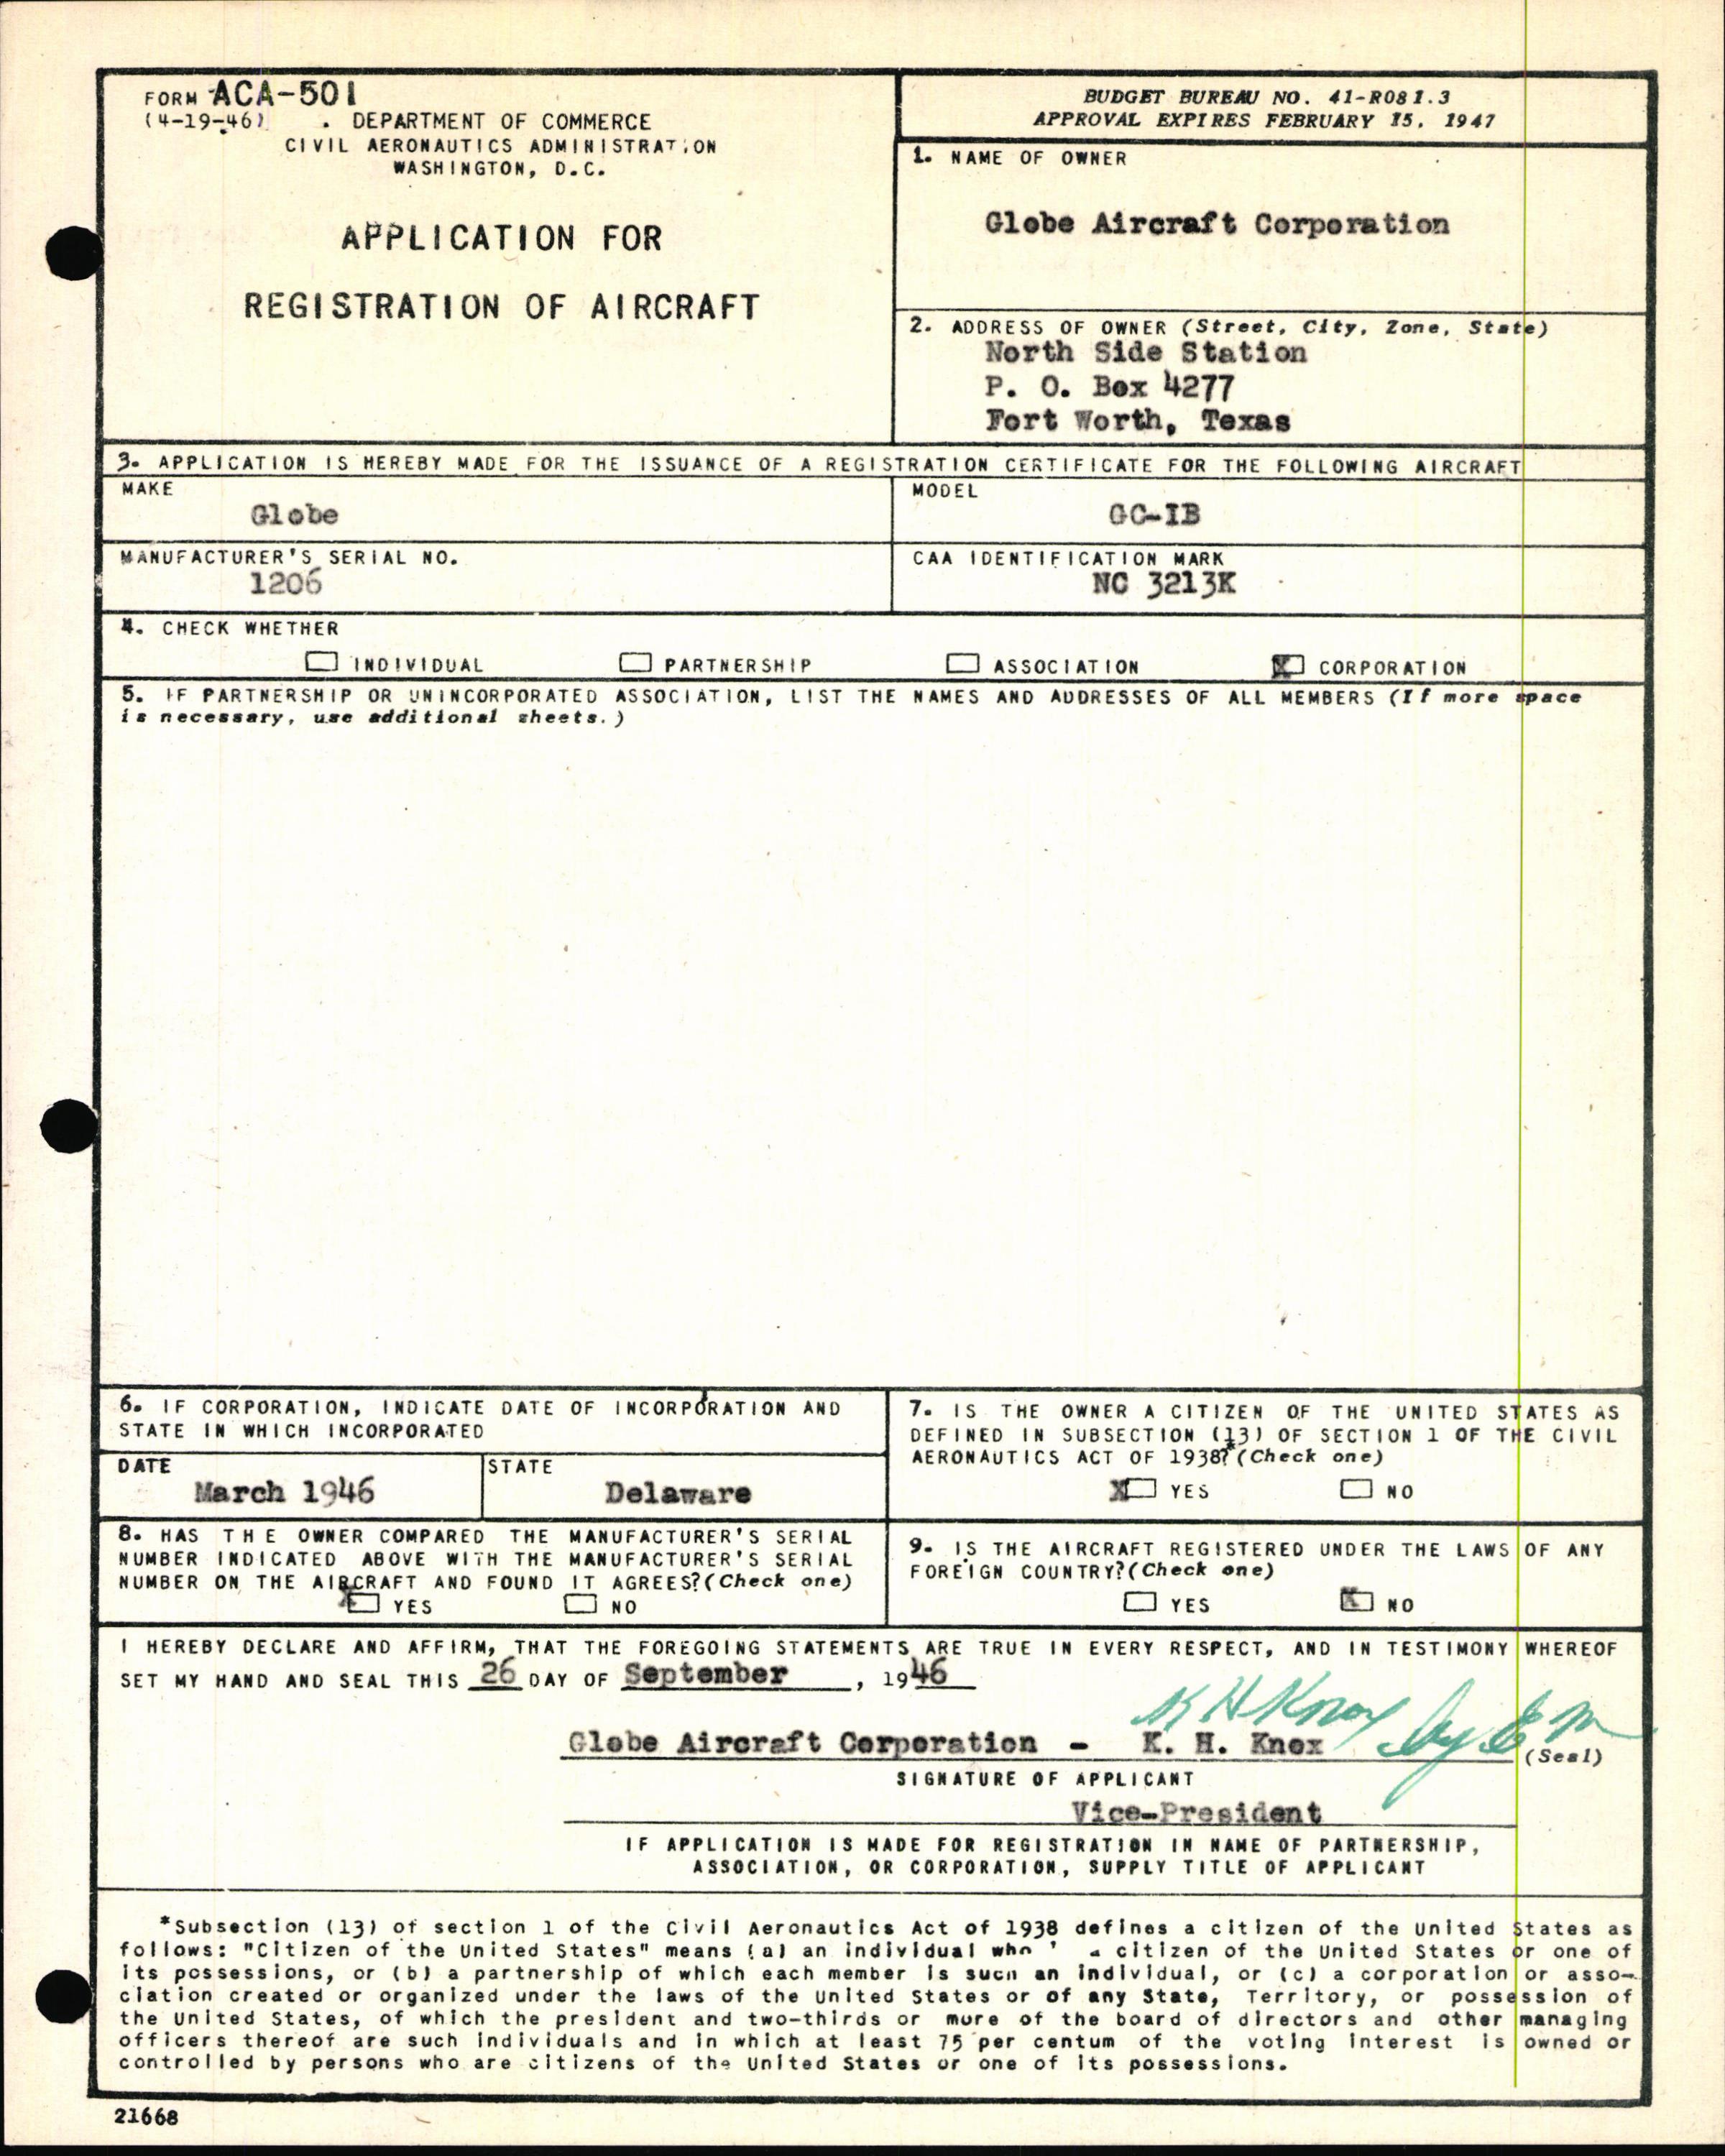 Sample page 5 from AirCorps Library document: Technical Information for Serial Number 1206